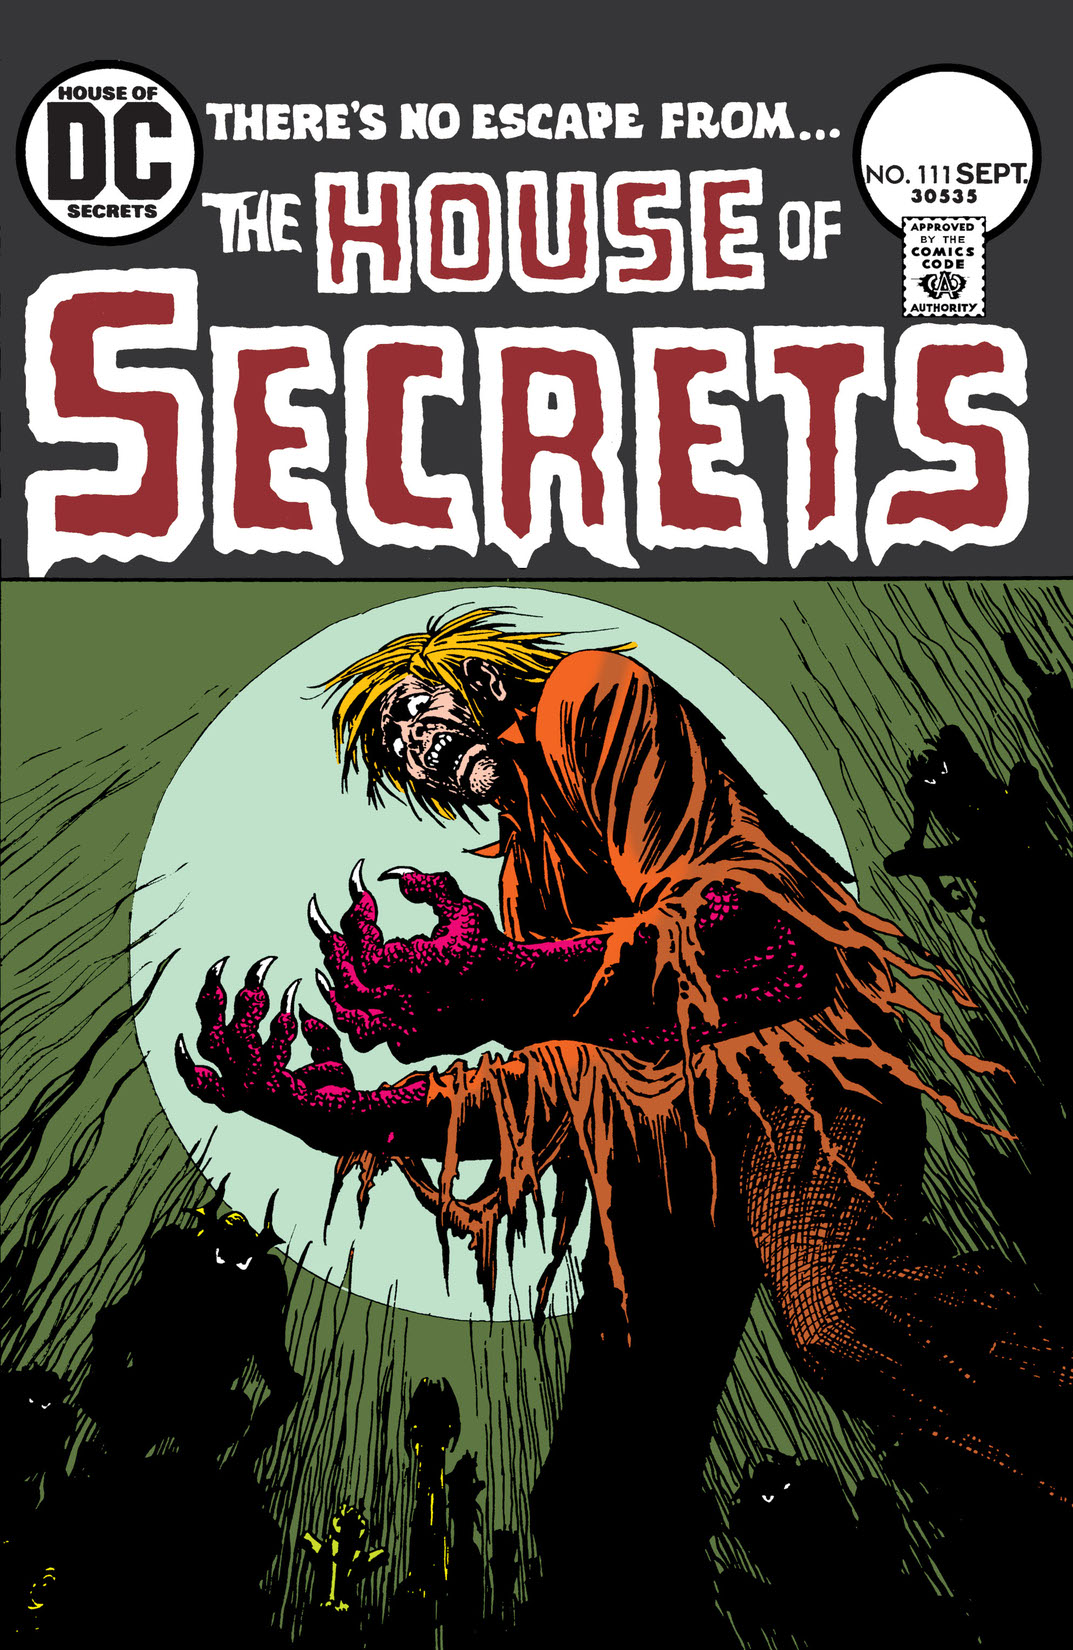 House of Secrets #111 preview images